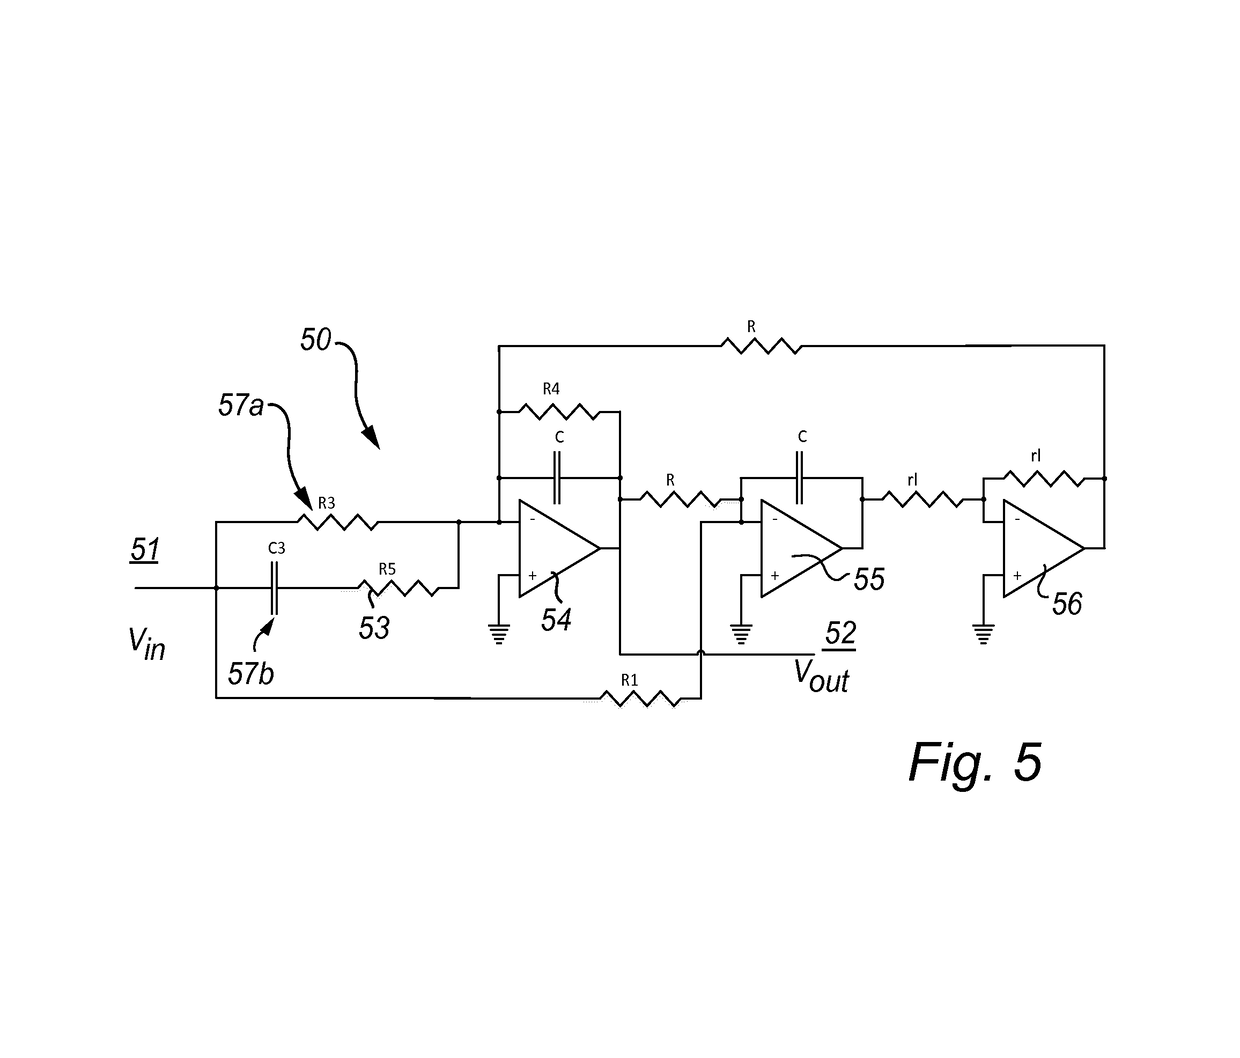 Self-oscillating amplifier with high order loop filter